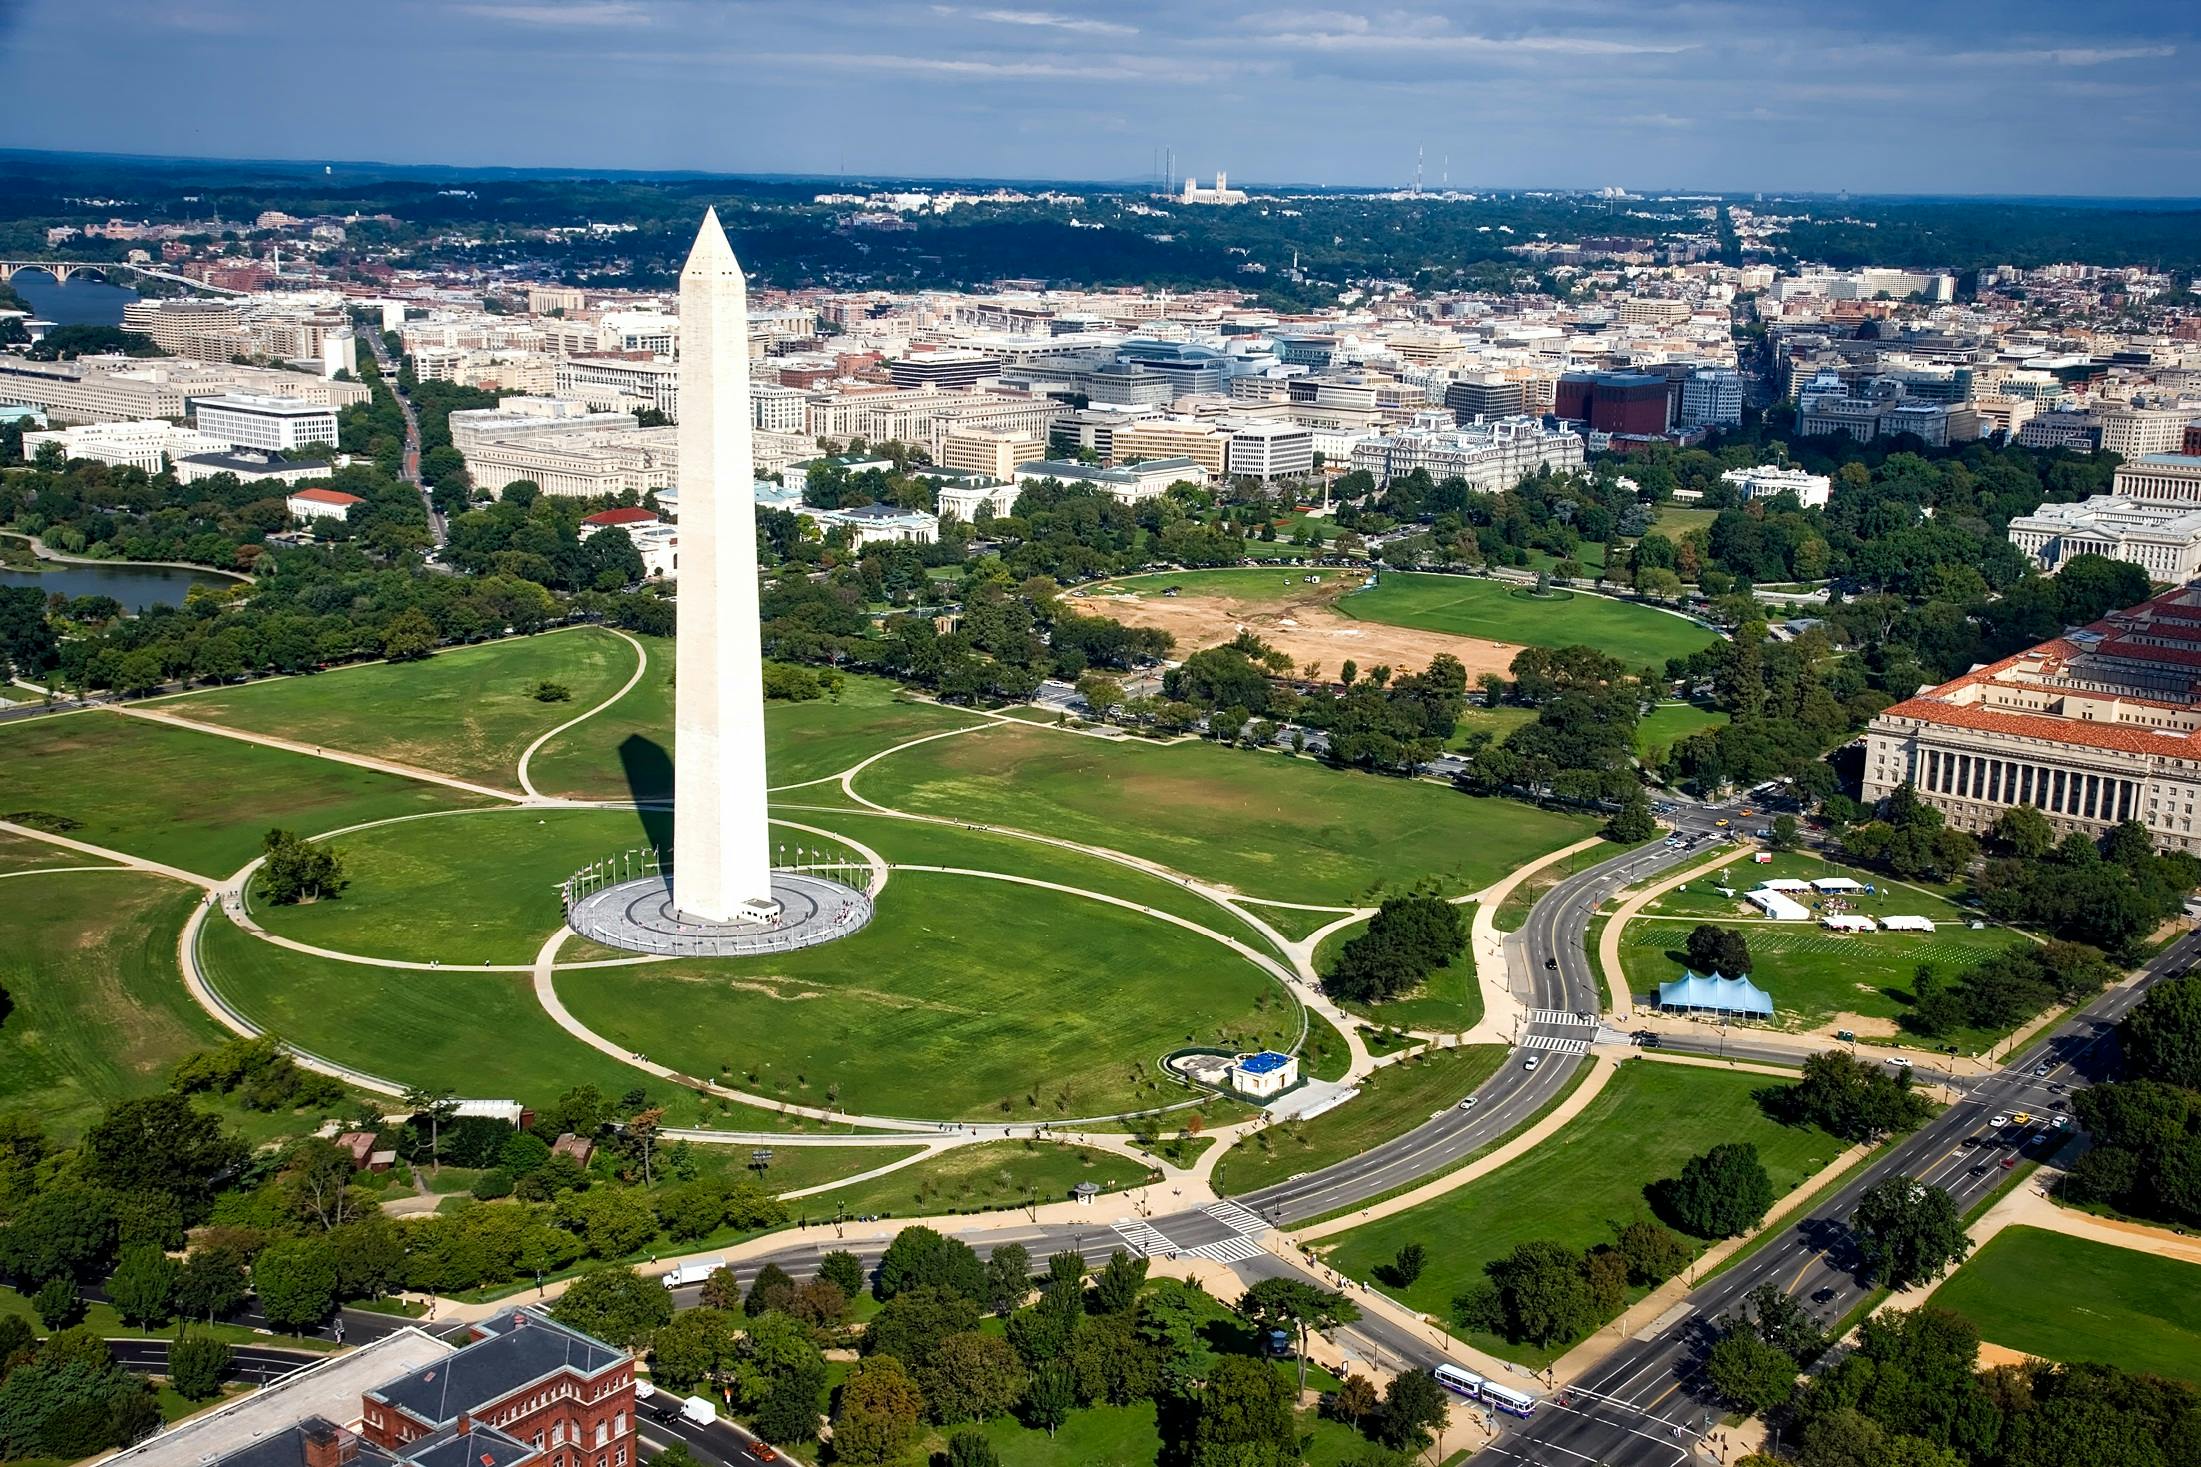 a view of the washington monument from the air, by Washington Allston, pexels contest winner, art nouveau, avatar image, grass field surrounding the city, slide show, wide high angle view